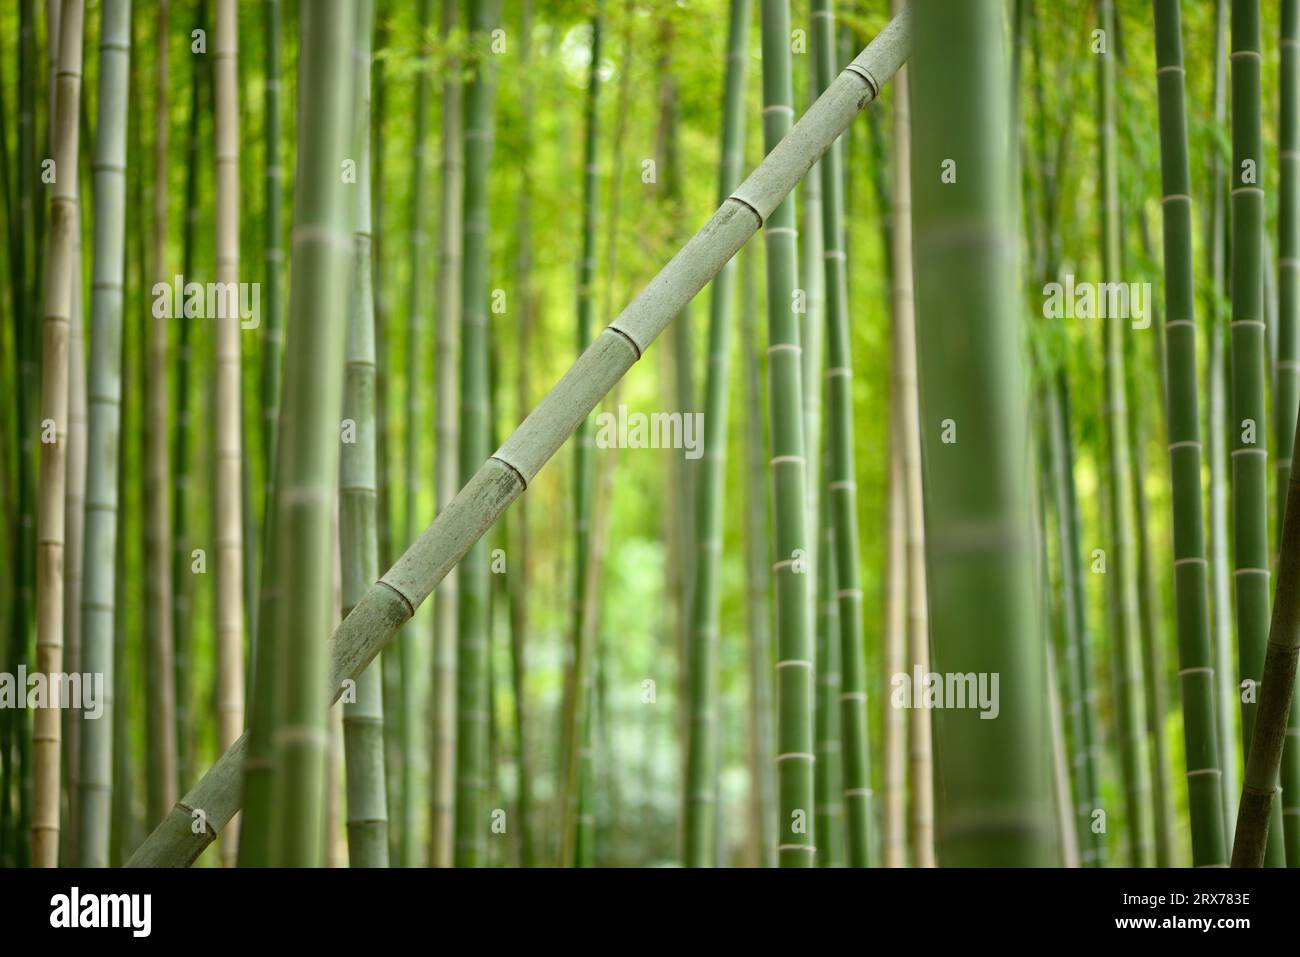 Single bamboo plant growing diagonal in an all vertical bamboo forest showing uniqueness of diversity. Stock Photo